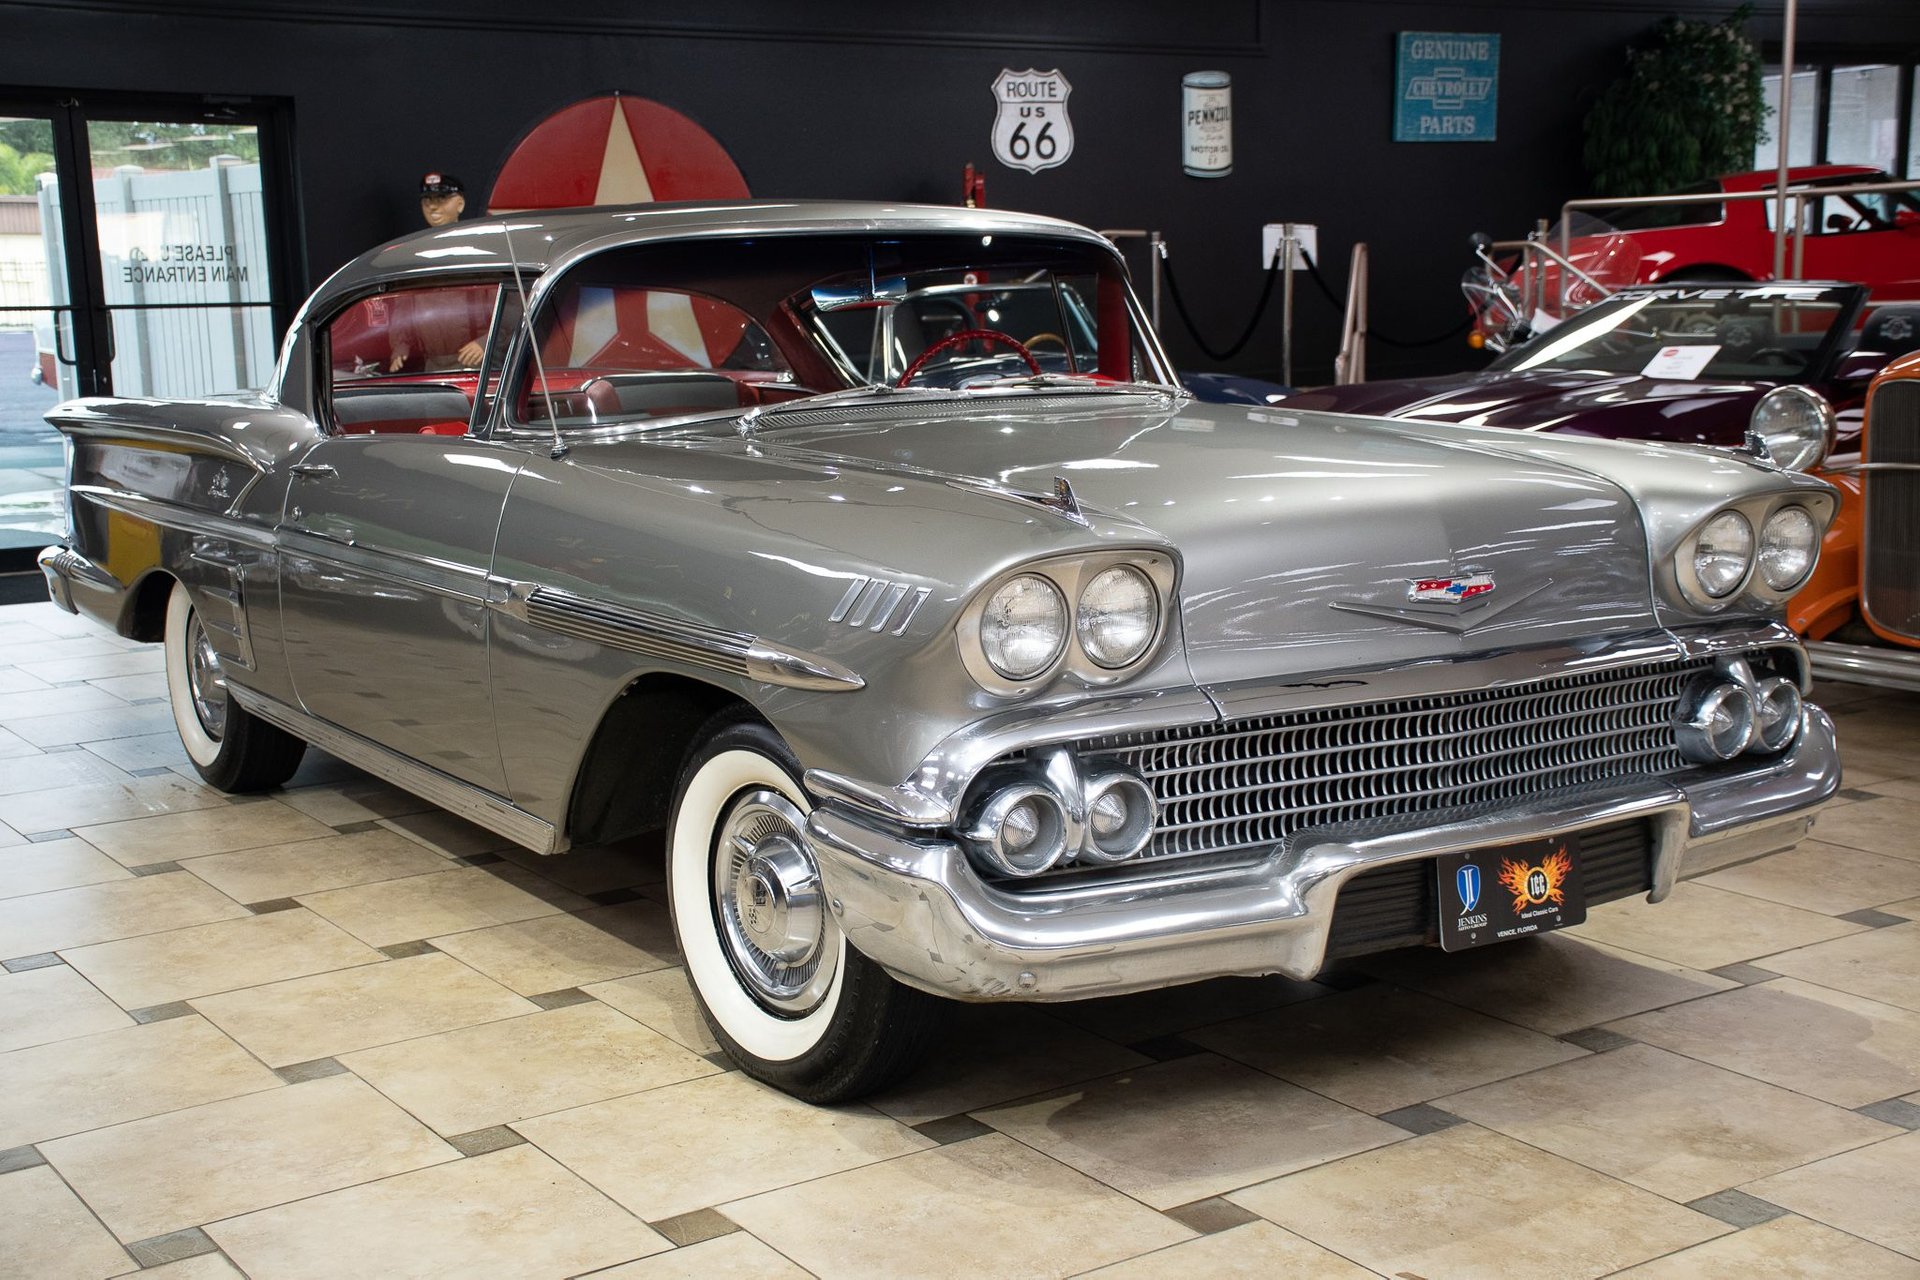 Modern Classic: This 1958 Chevrolet Impala Is a Perfect 10, Priced ...